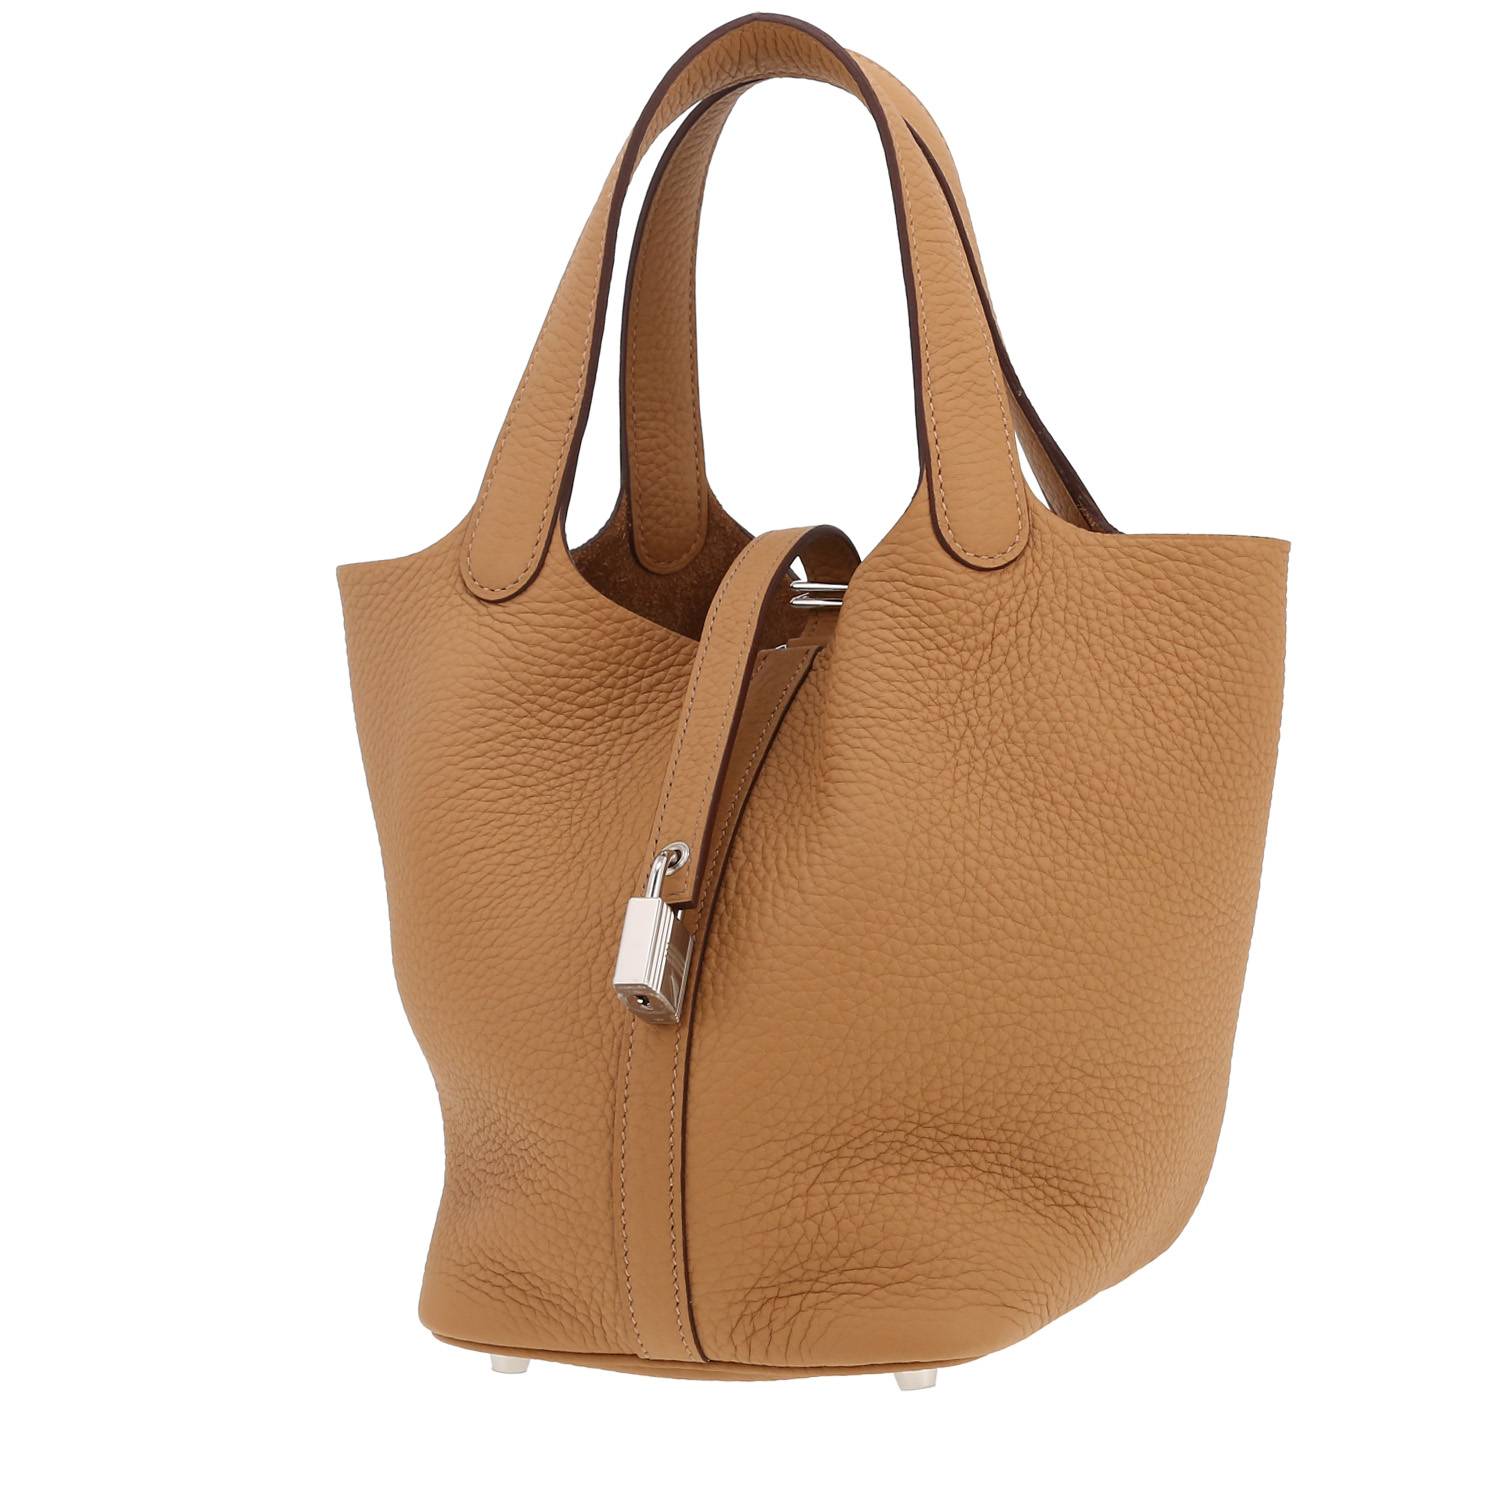 Picotin Handbag In Biscuit Togo Leather